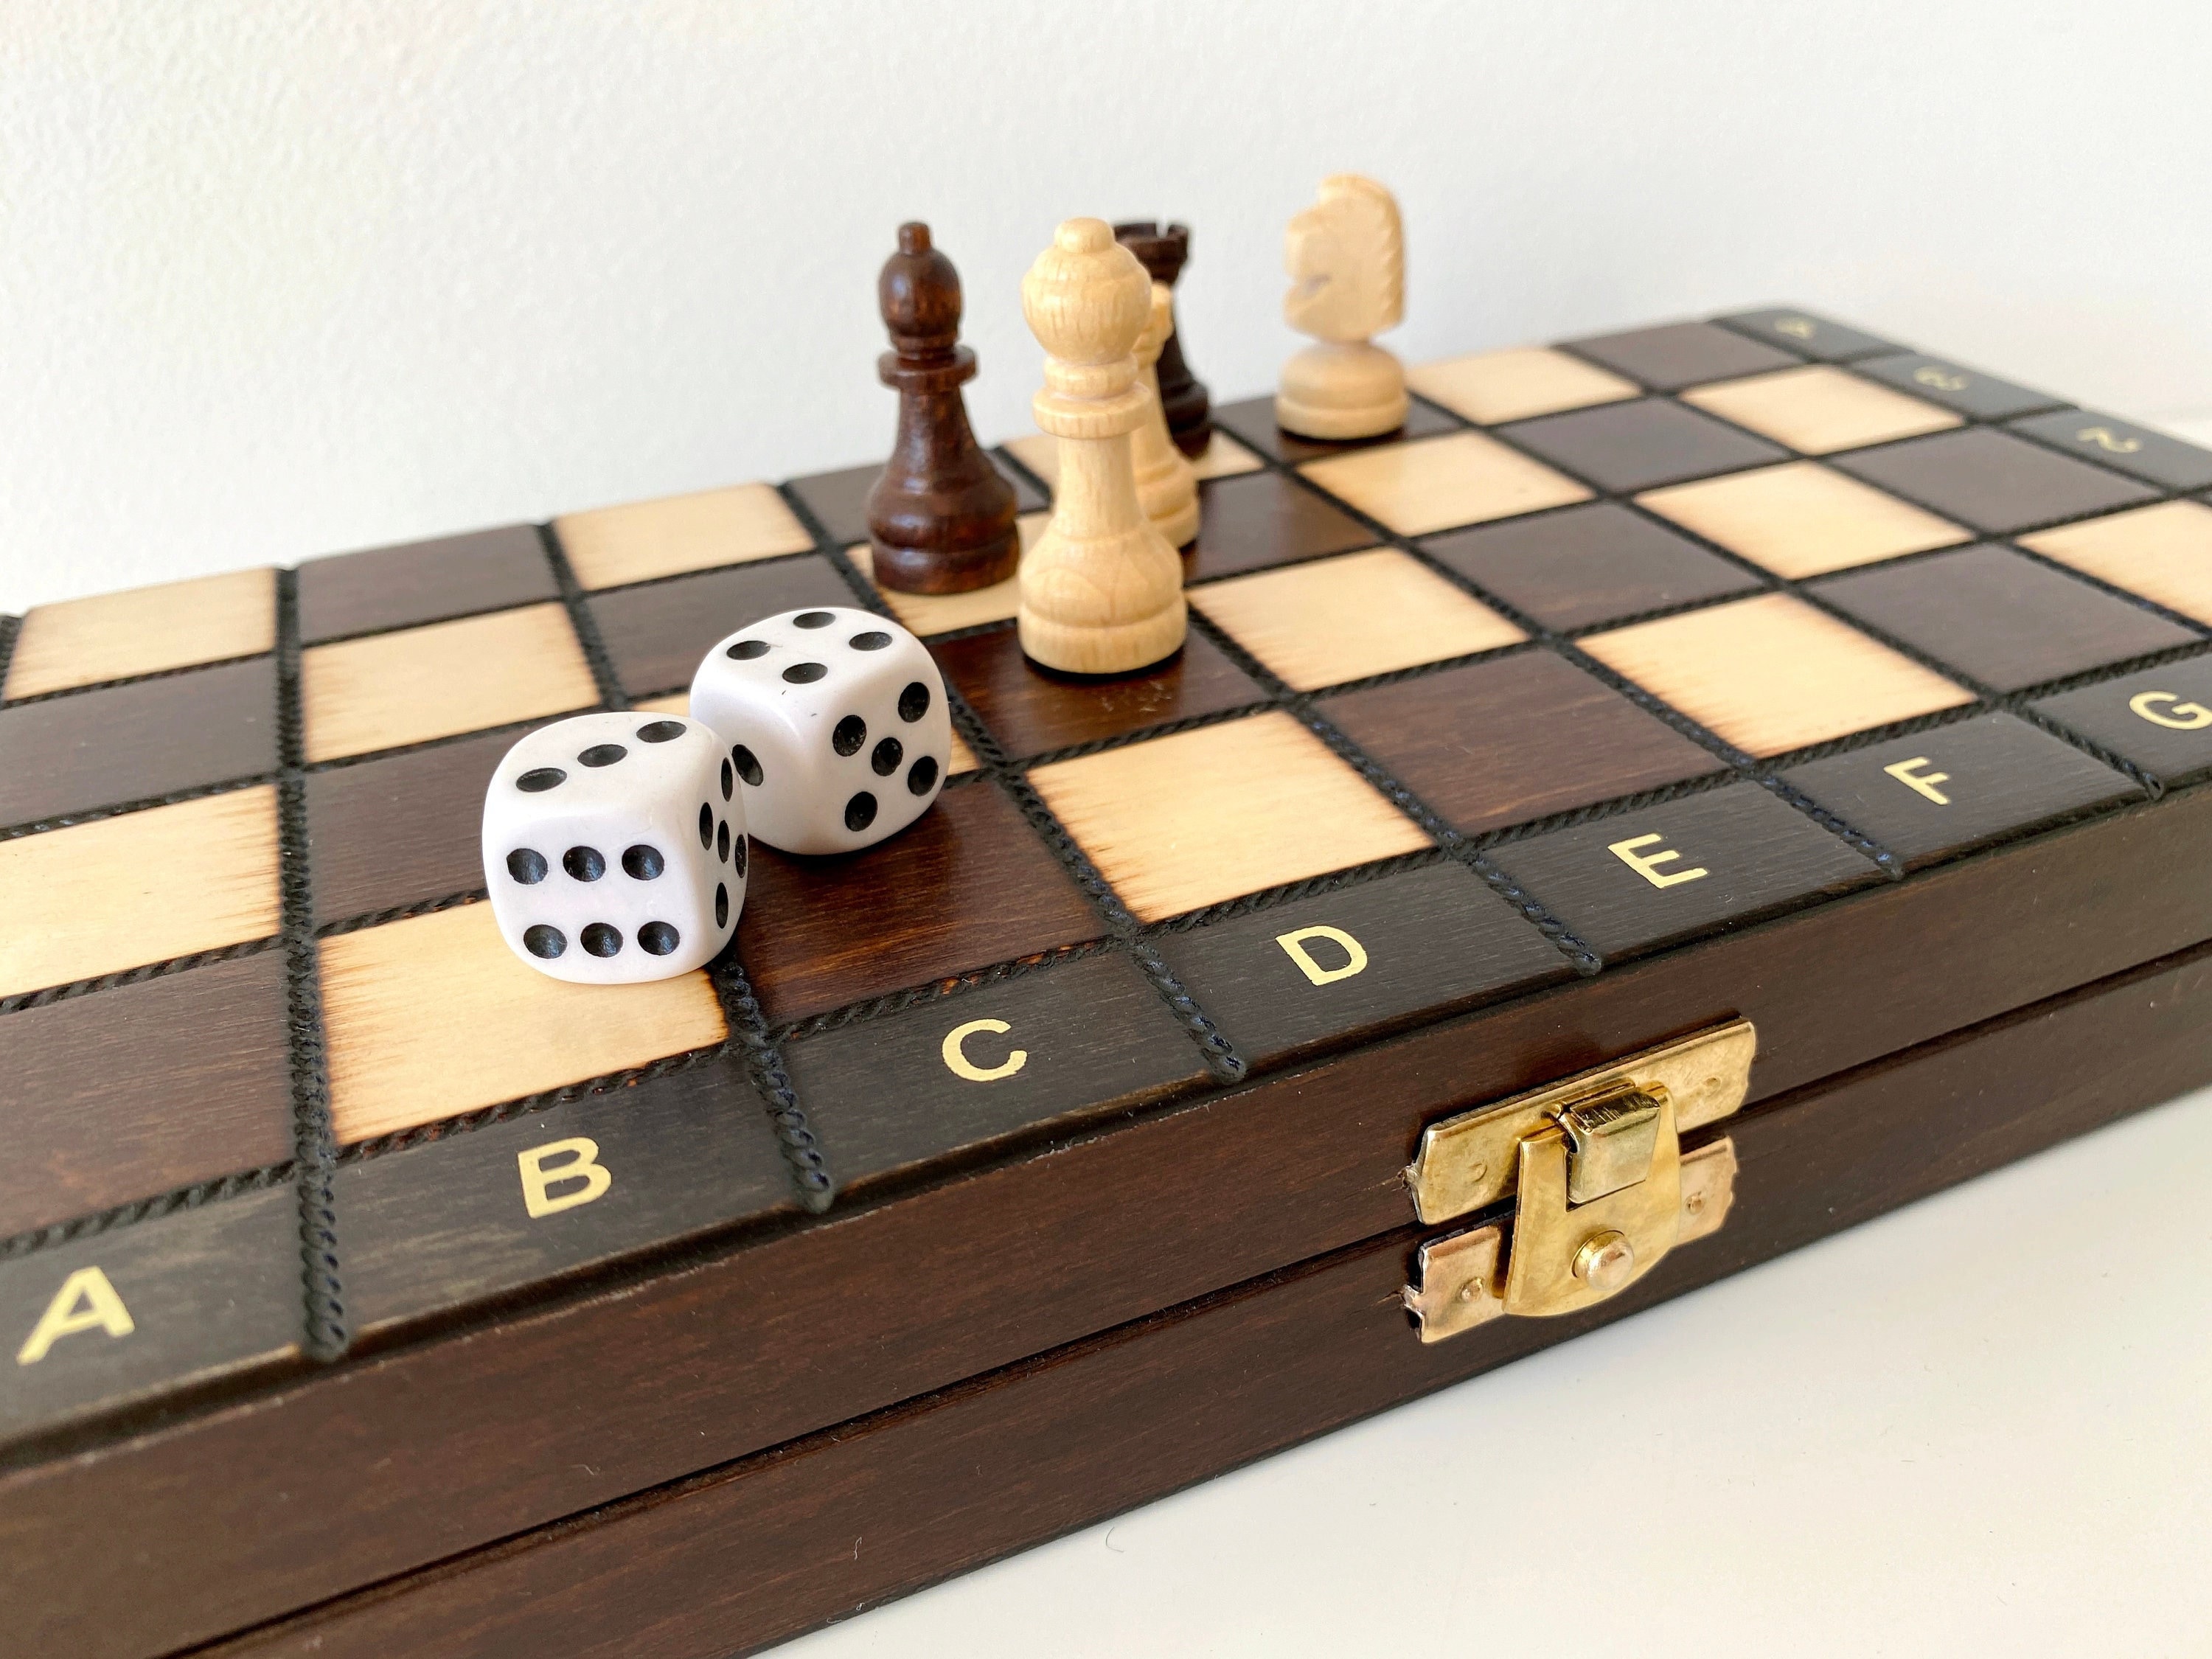 Wooden Chess Set - Handcrafted Chess Pieces - 15 Inch Chess Board -  Foldable - Interior Storage Space - Travel Friendly - Felt Bottom - 3 Inch  King - Bonus Wooden Checkers Pieces, Board Games -  Canada